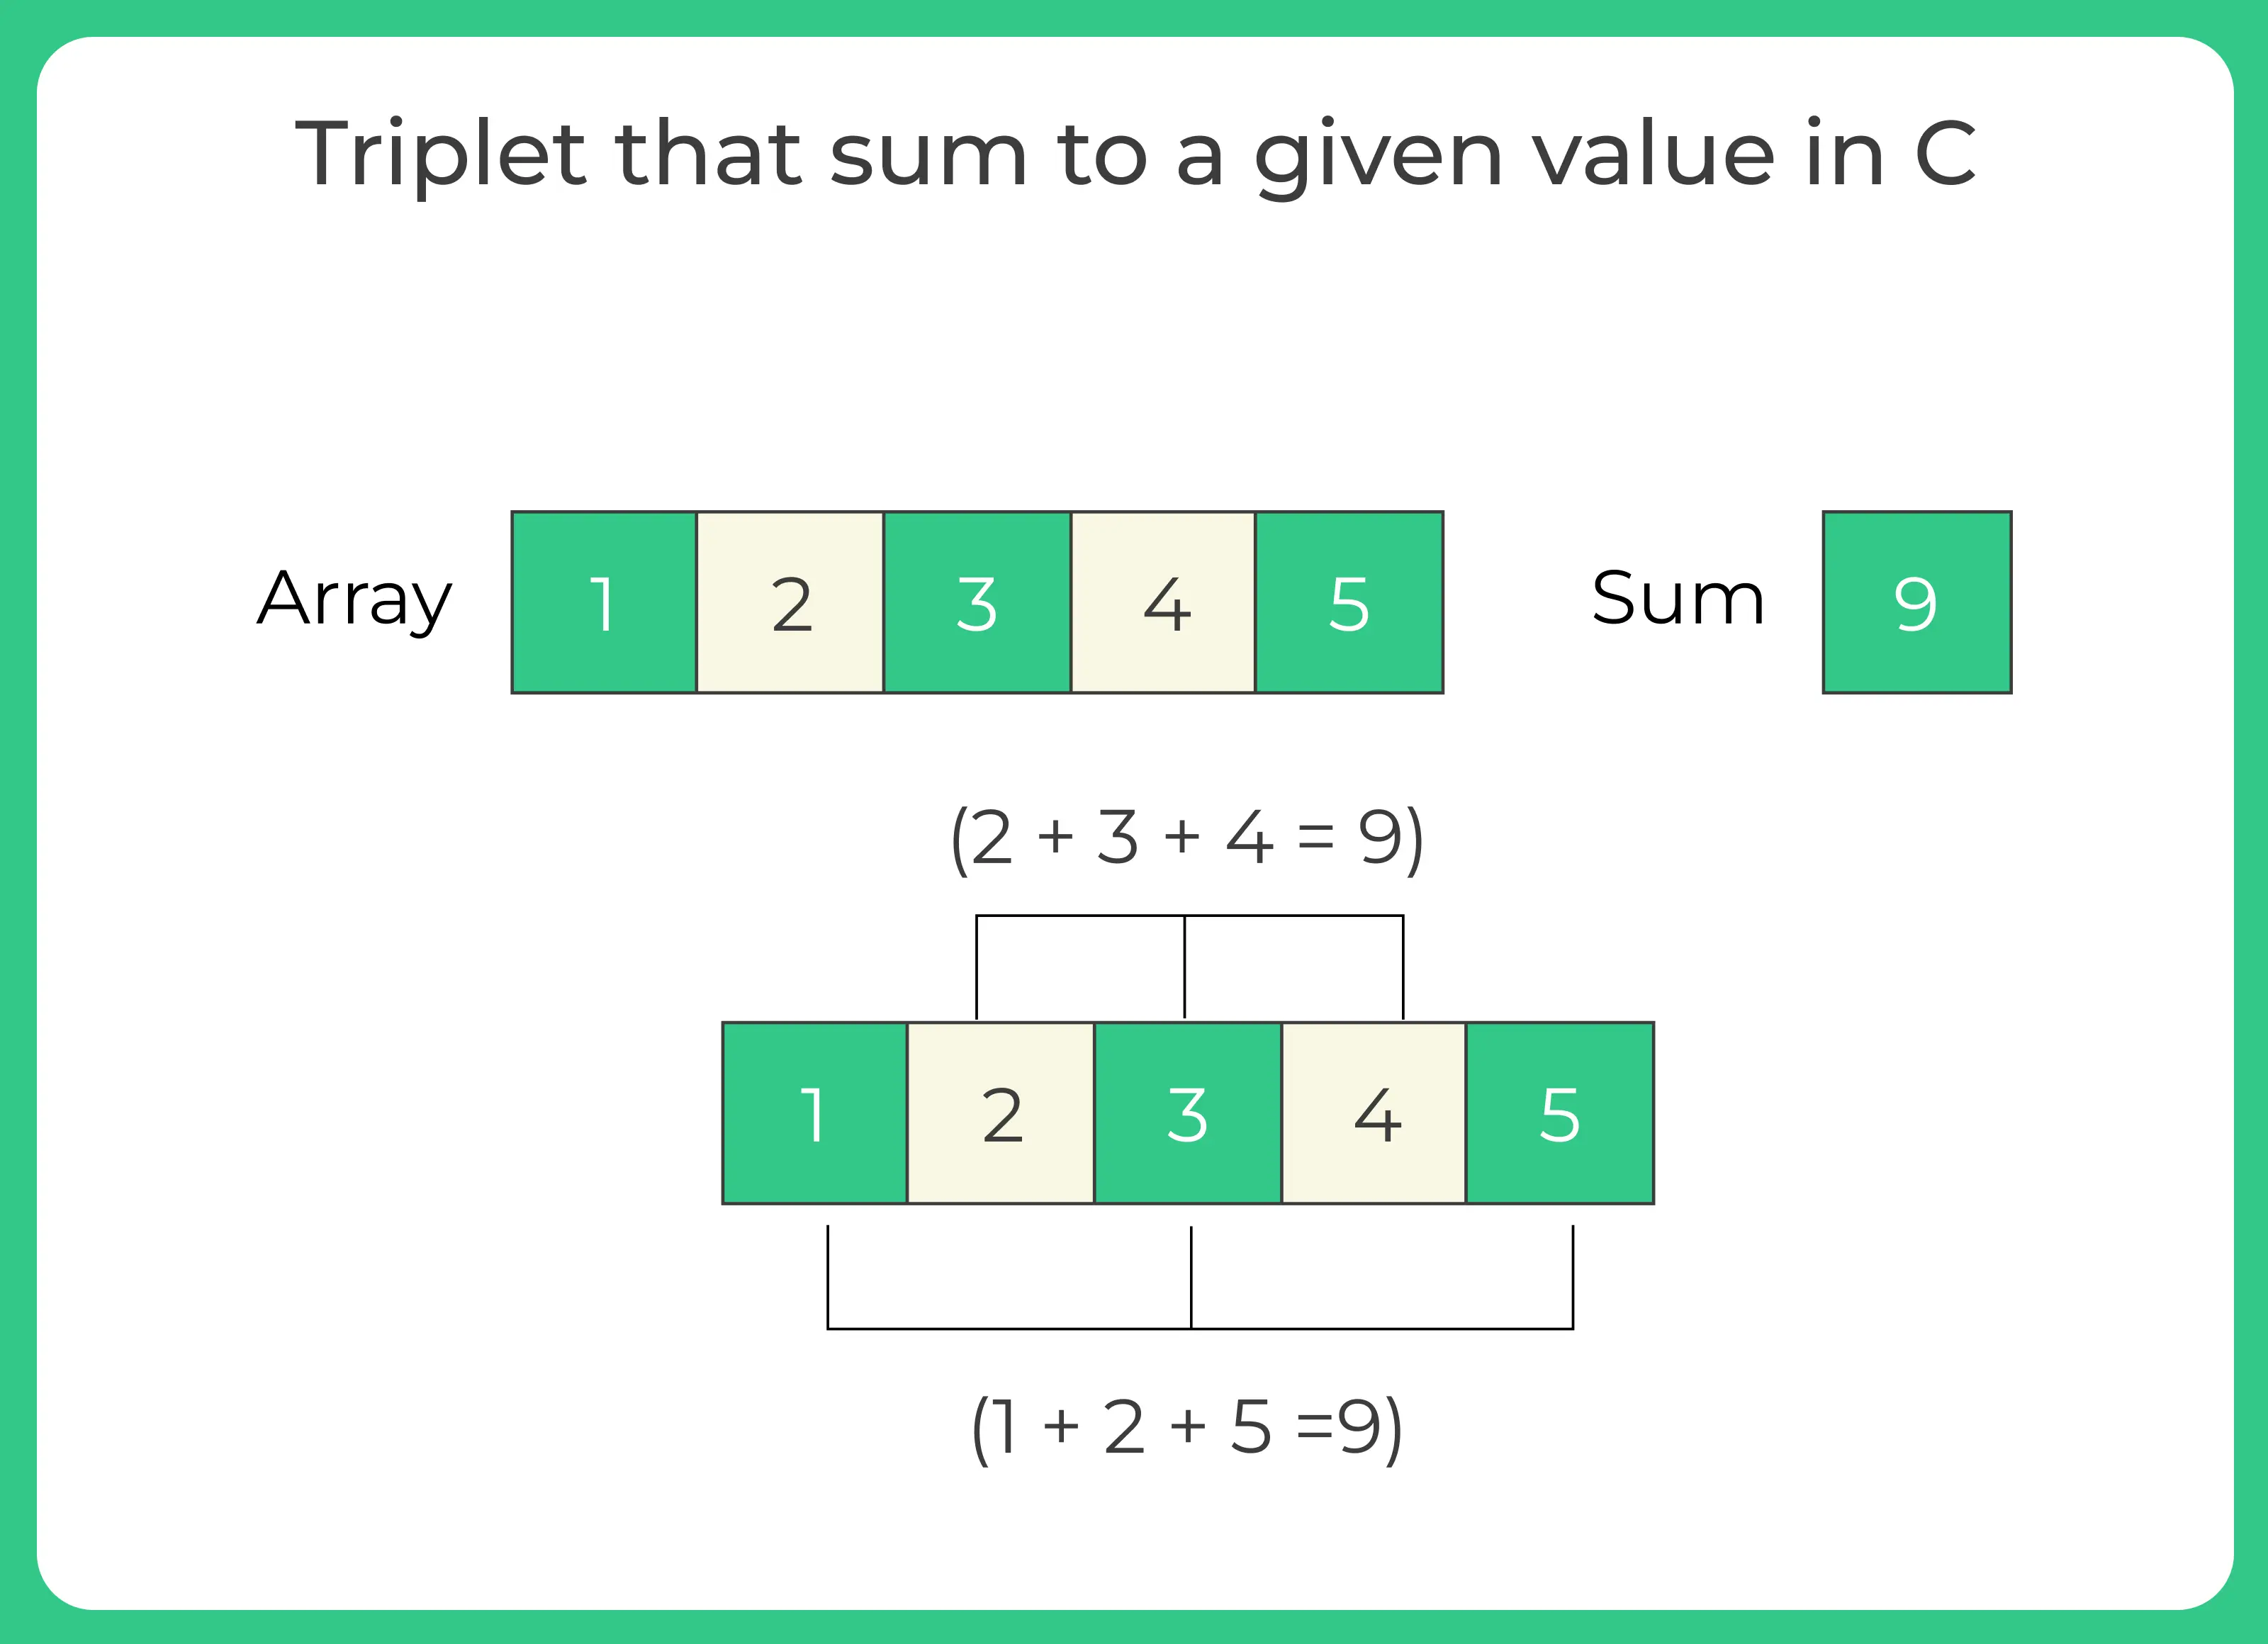 Triplet that sum to a given value in C